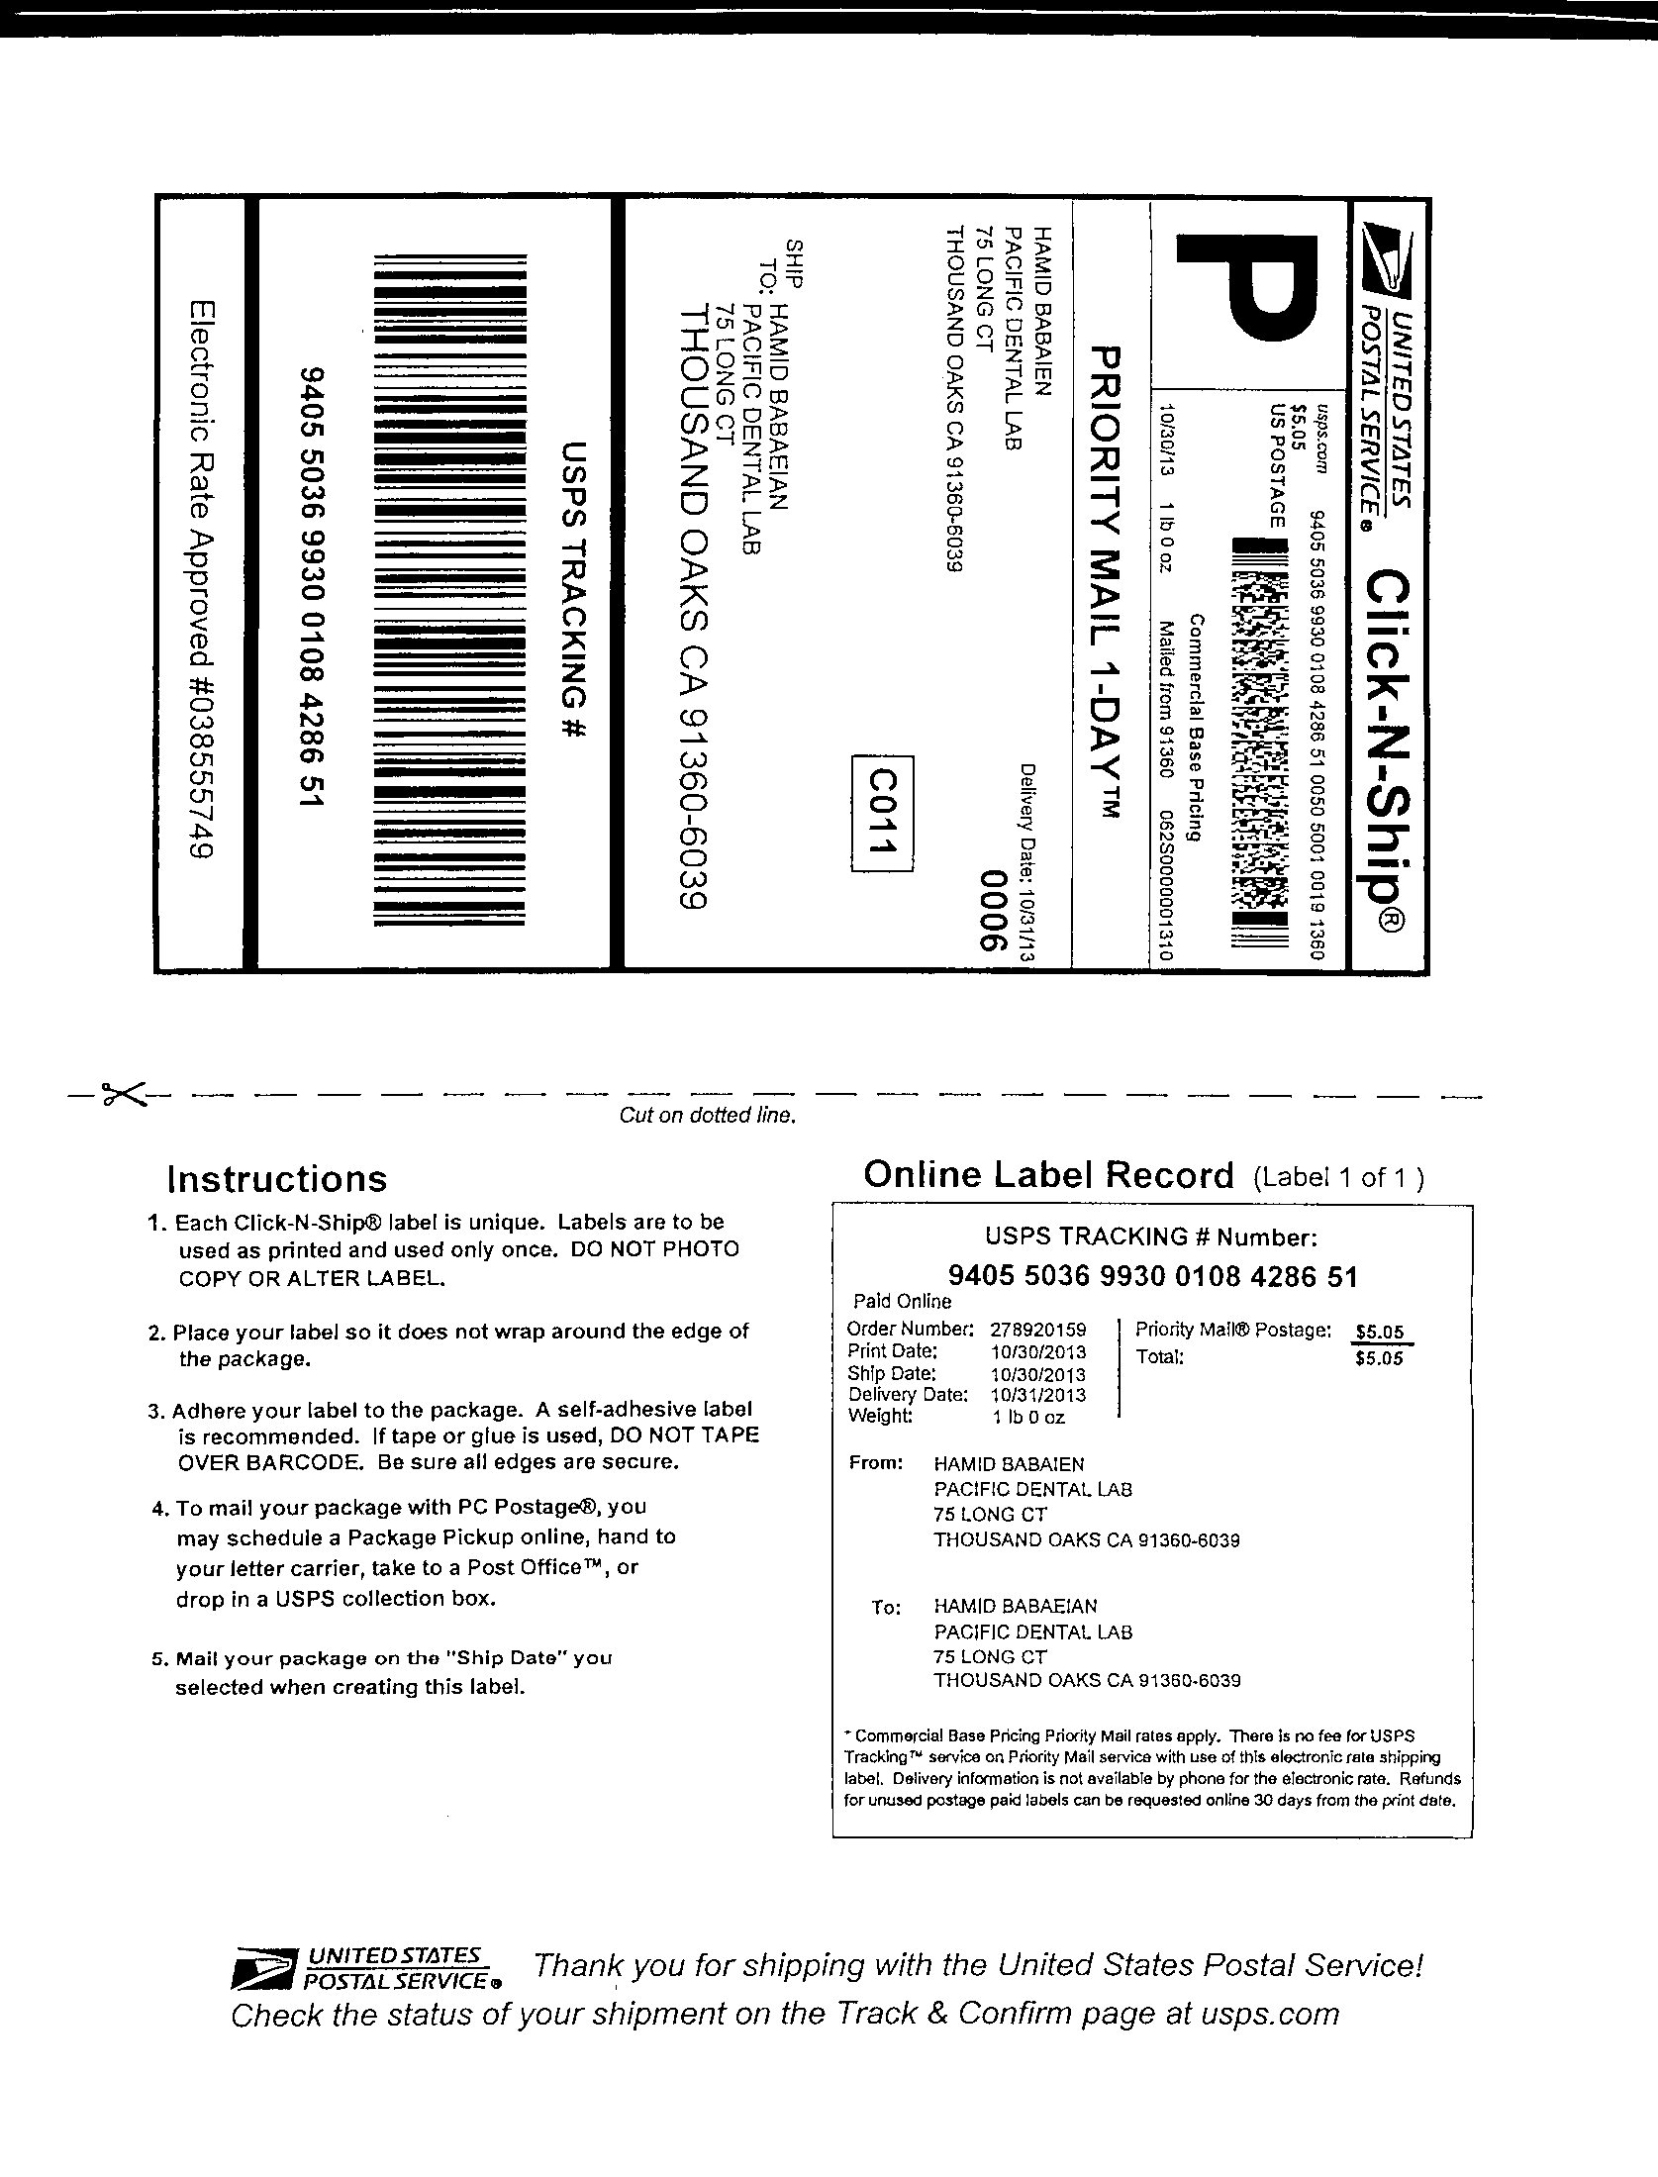 Request Shipping Labels « Pacific Dental Lab intended for Usps Shipping Label Template Download